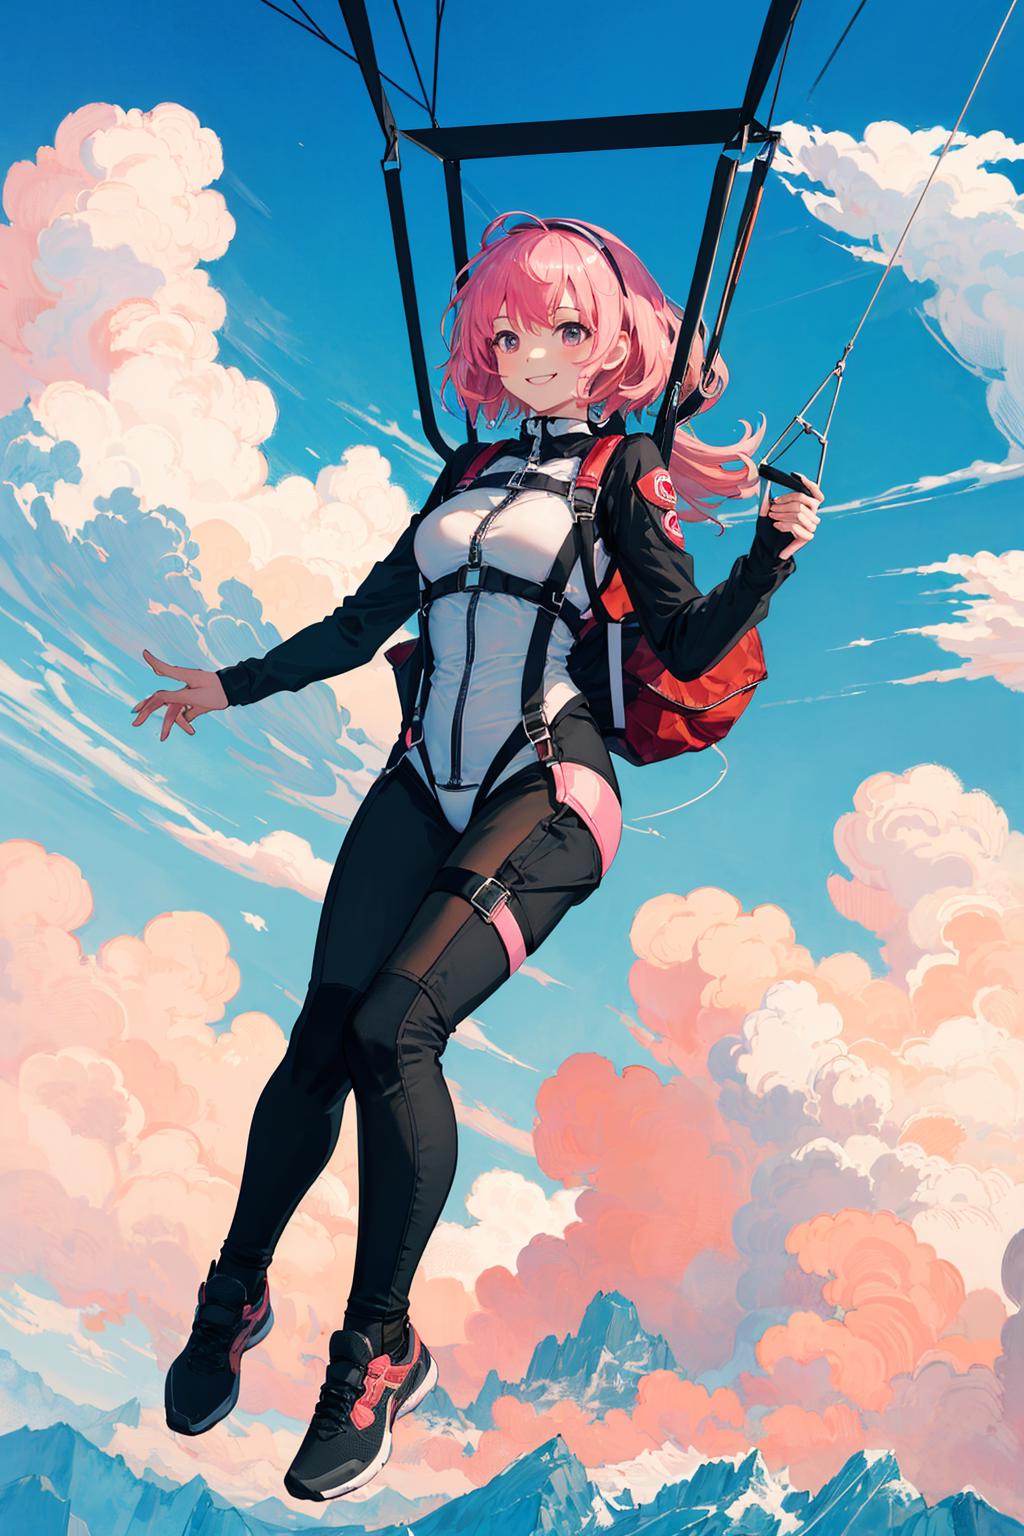 Wallpaper : sky, ART, fictional character, helmet, happy, illustration,  parachute, anime, animation, graphics, red flag, stunt performer, action  figure, extreme sport, clip art, adventure, graphic design 1920x1080 - niny  - 2071293 - HD Wallpapers ...